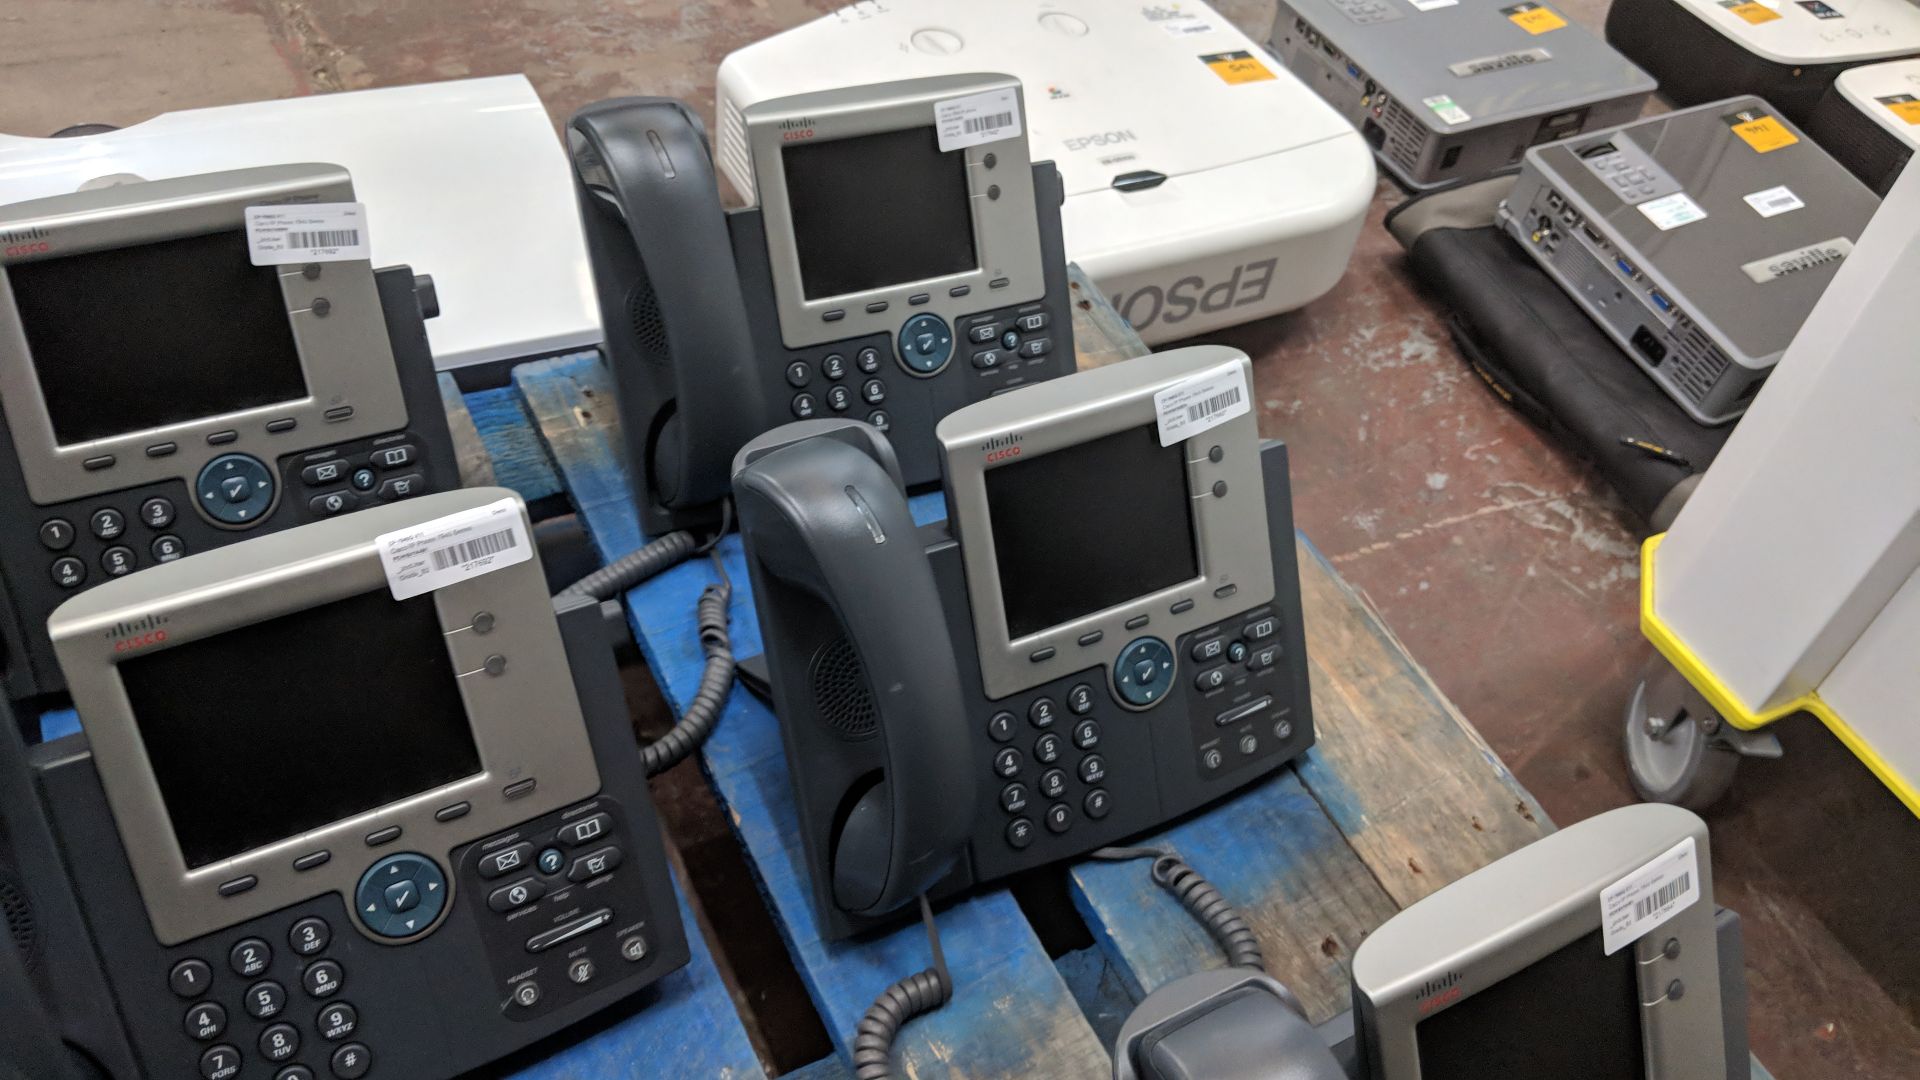 7 off Cisco model CP-7945G IP telephone handsets IMPORTANT: Please remember goods successfully bid - Image 4 of 8